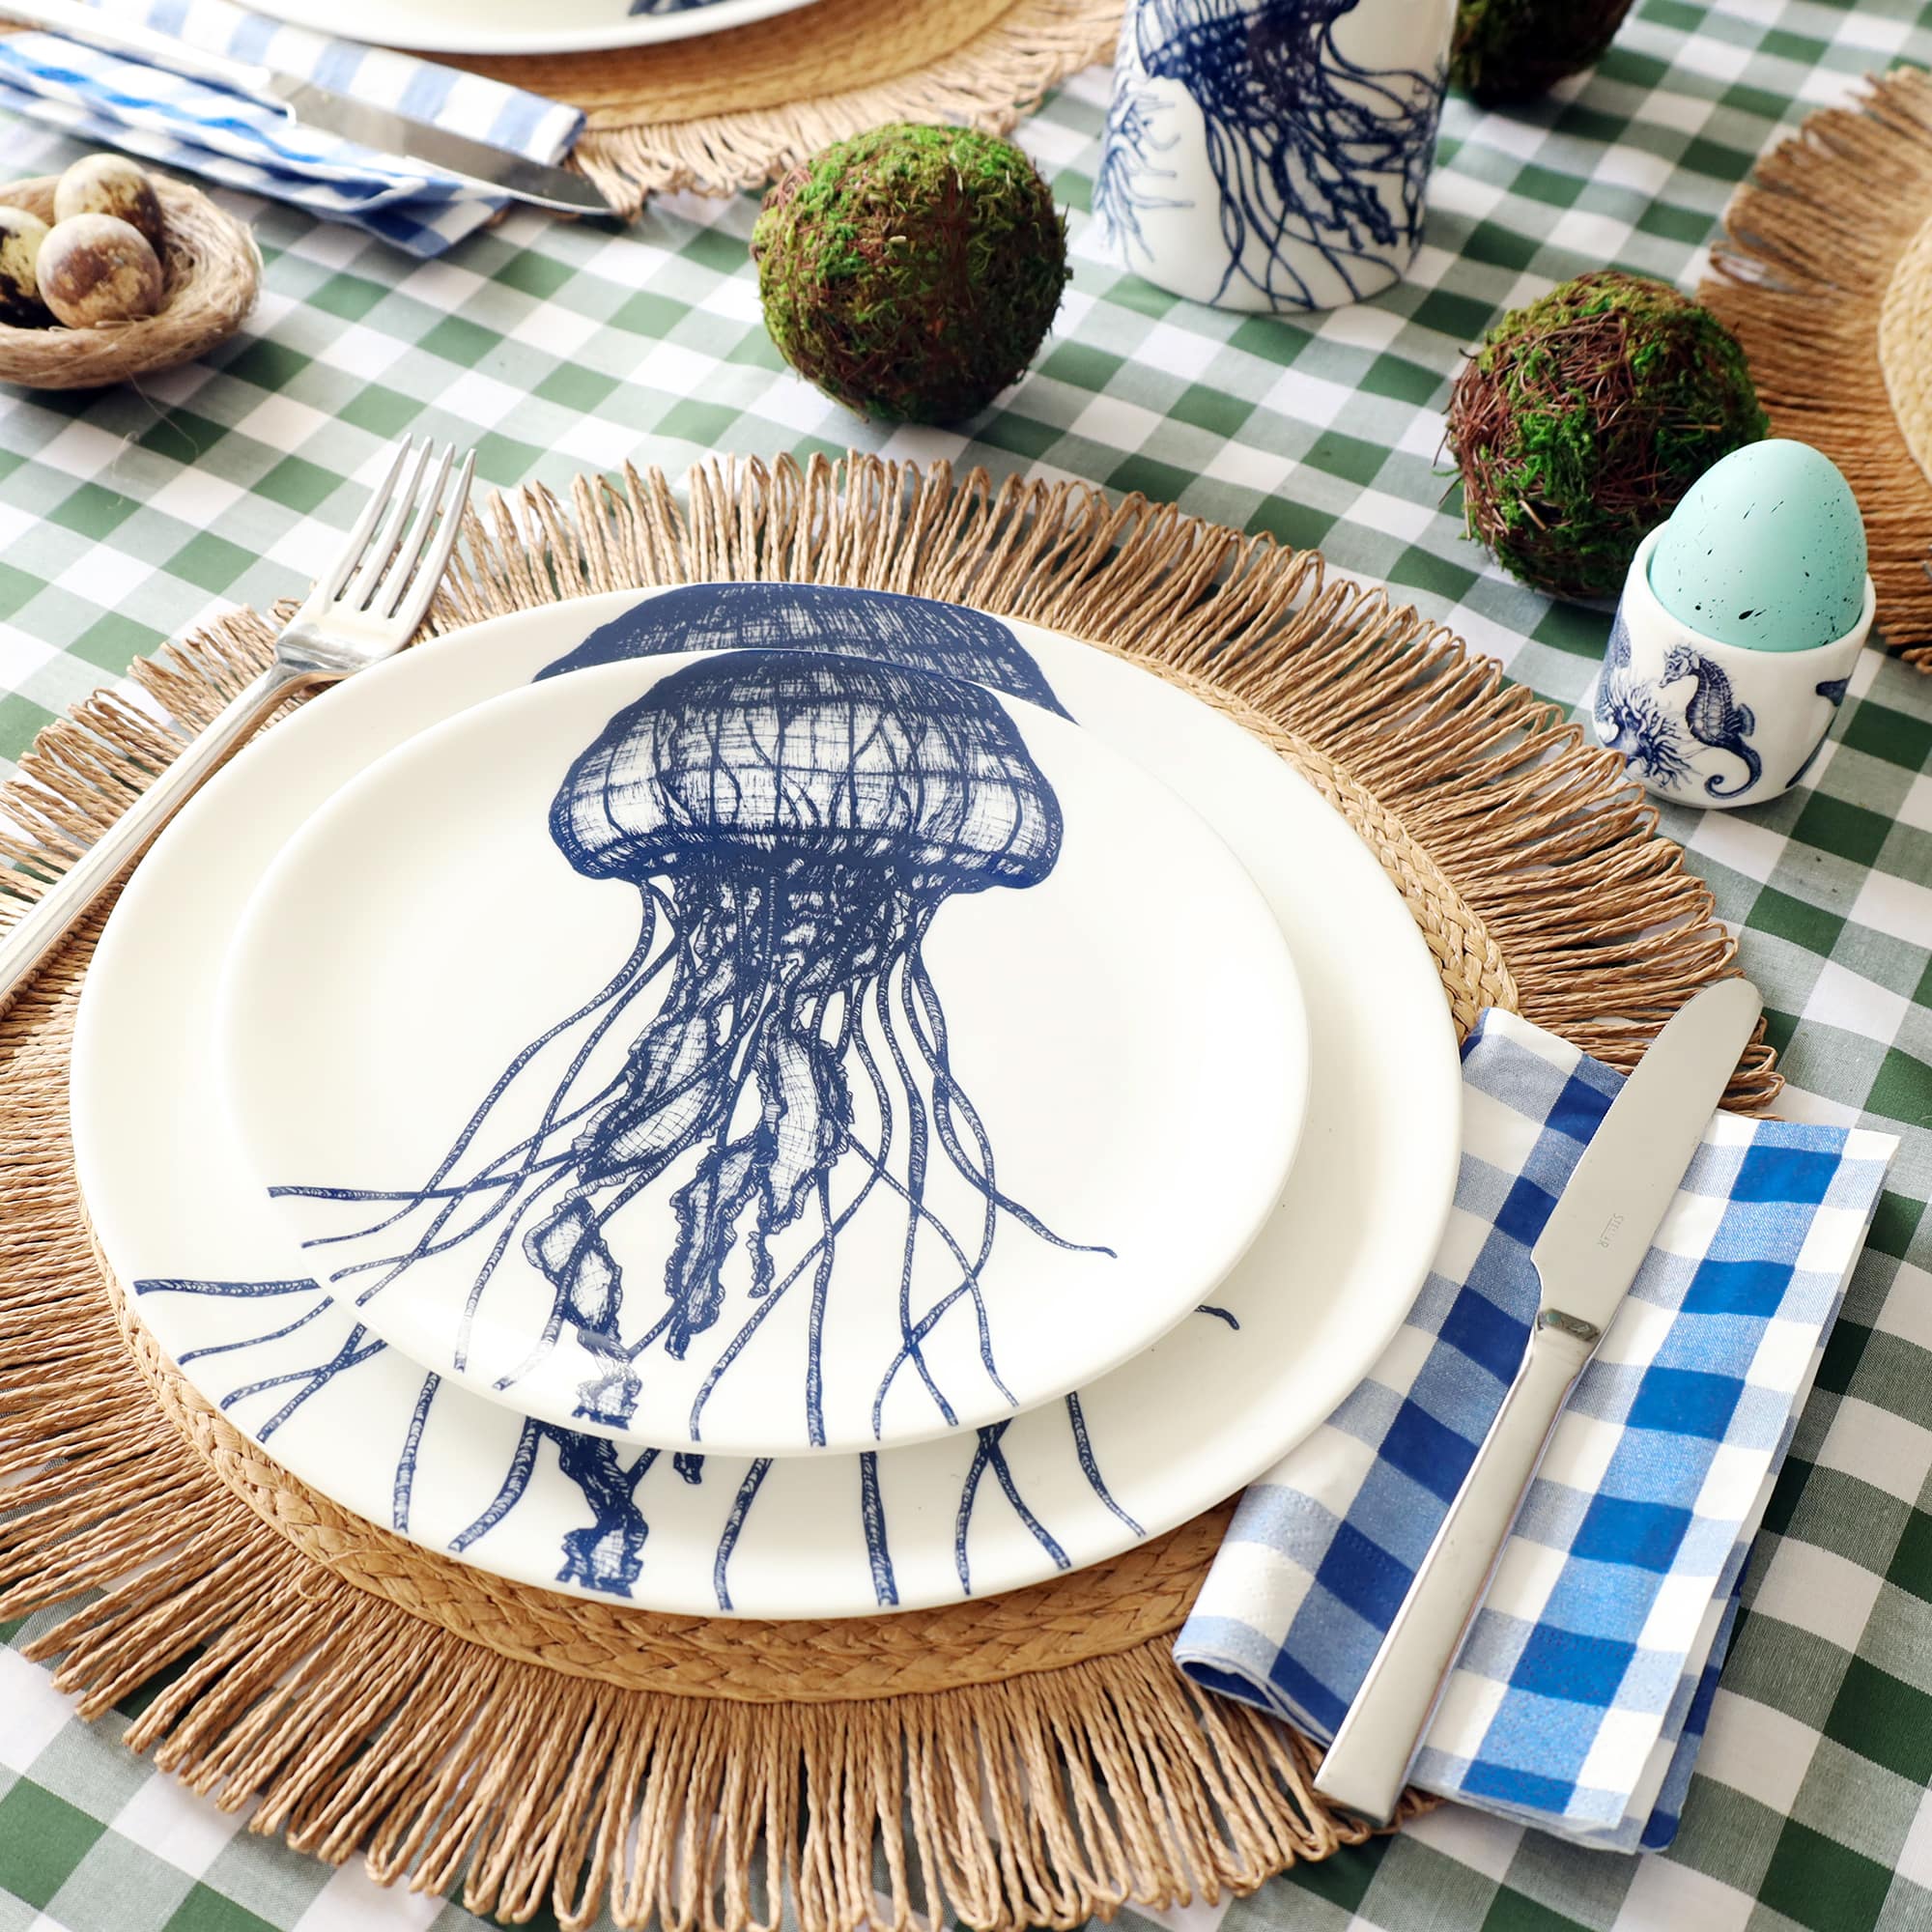 White bone china dinner plate with side plate sitting on top. Both plates have a navy blue illustration of a jellyfish on. They are set as a place setting on a raffia placemat with blue gingham napkin and green gingham tablecloth. the table is set for Easter with eggs in egg cups and moss balls.